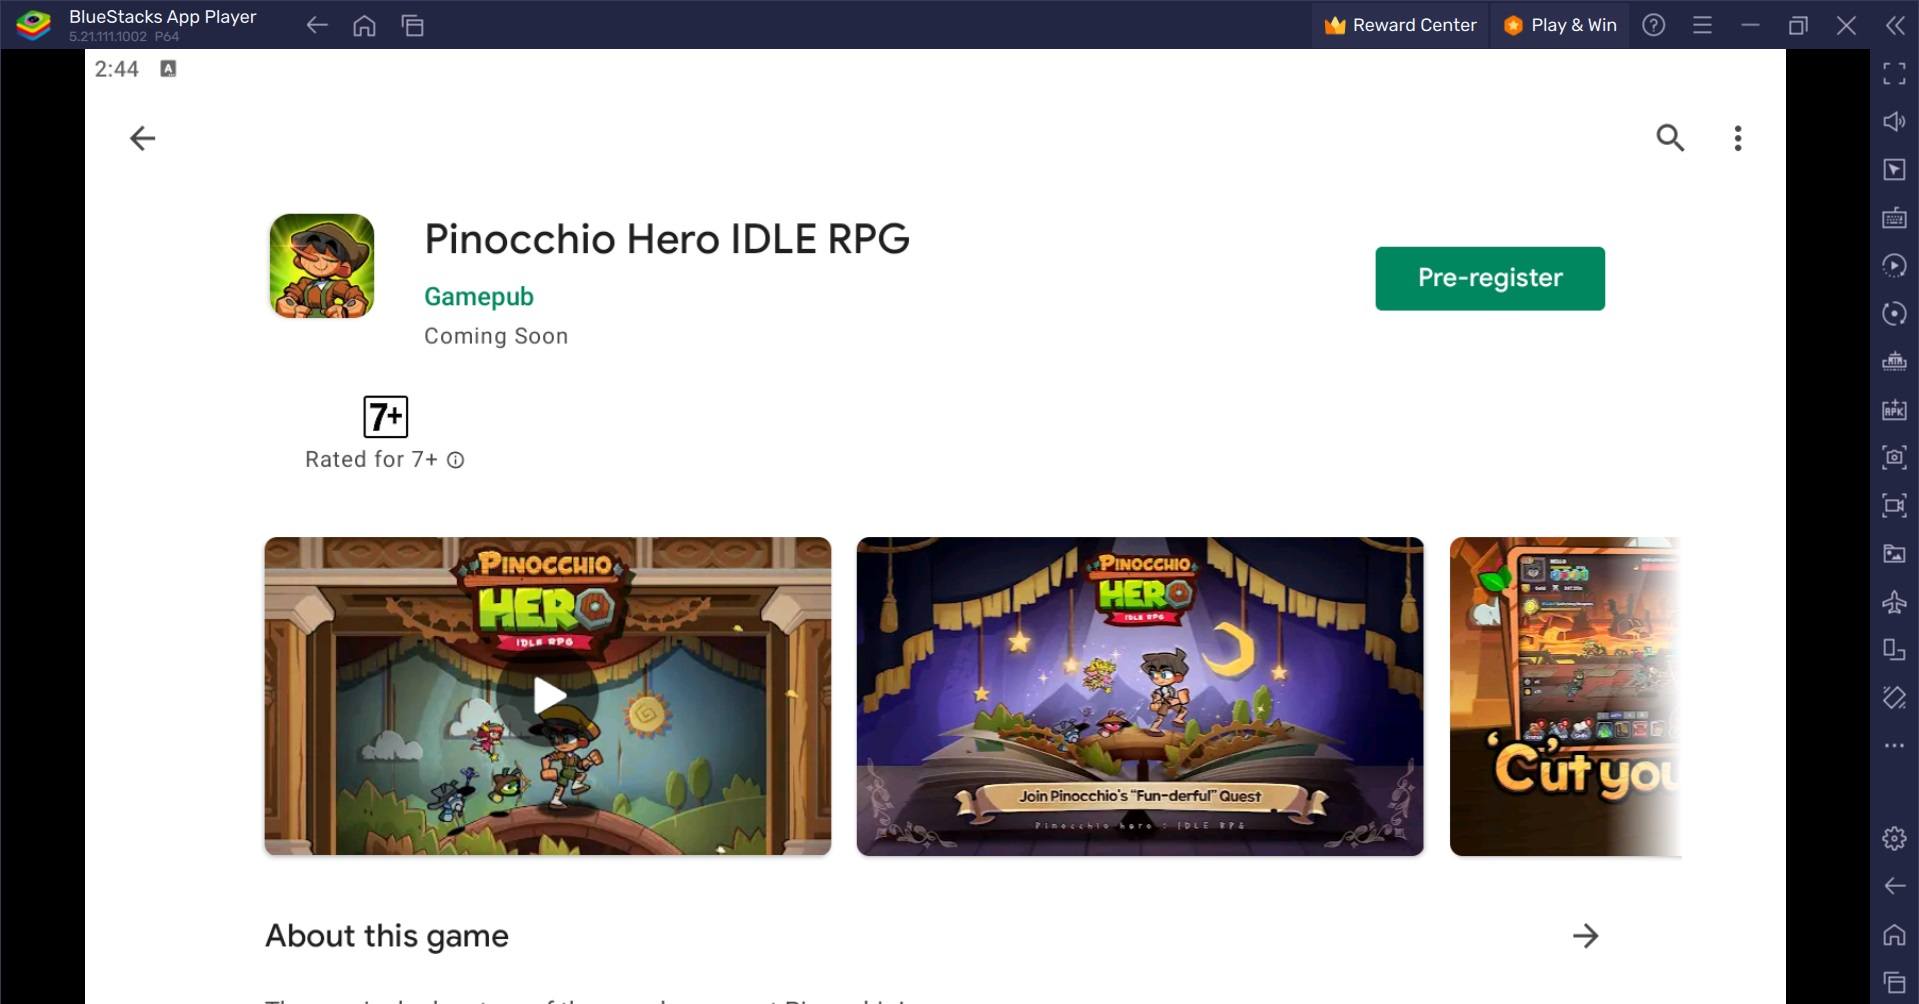 How to Play Pinocchio Hero IDLE RPG on PC with BlueStacks